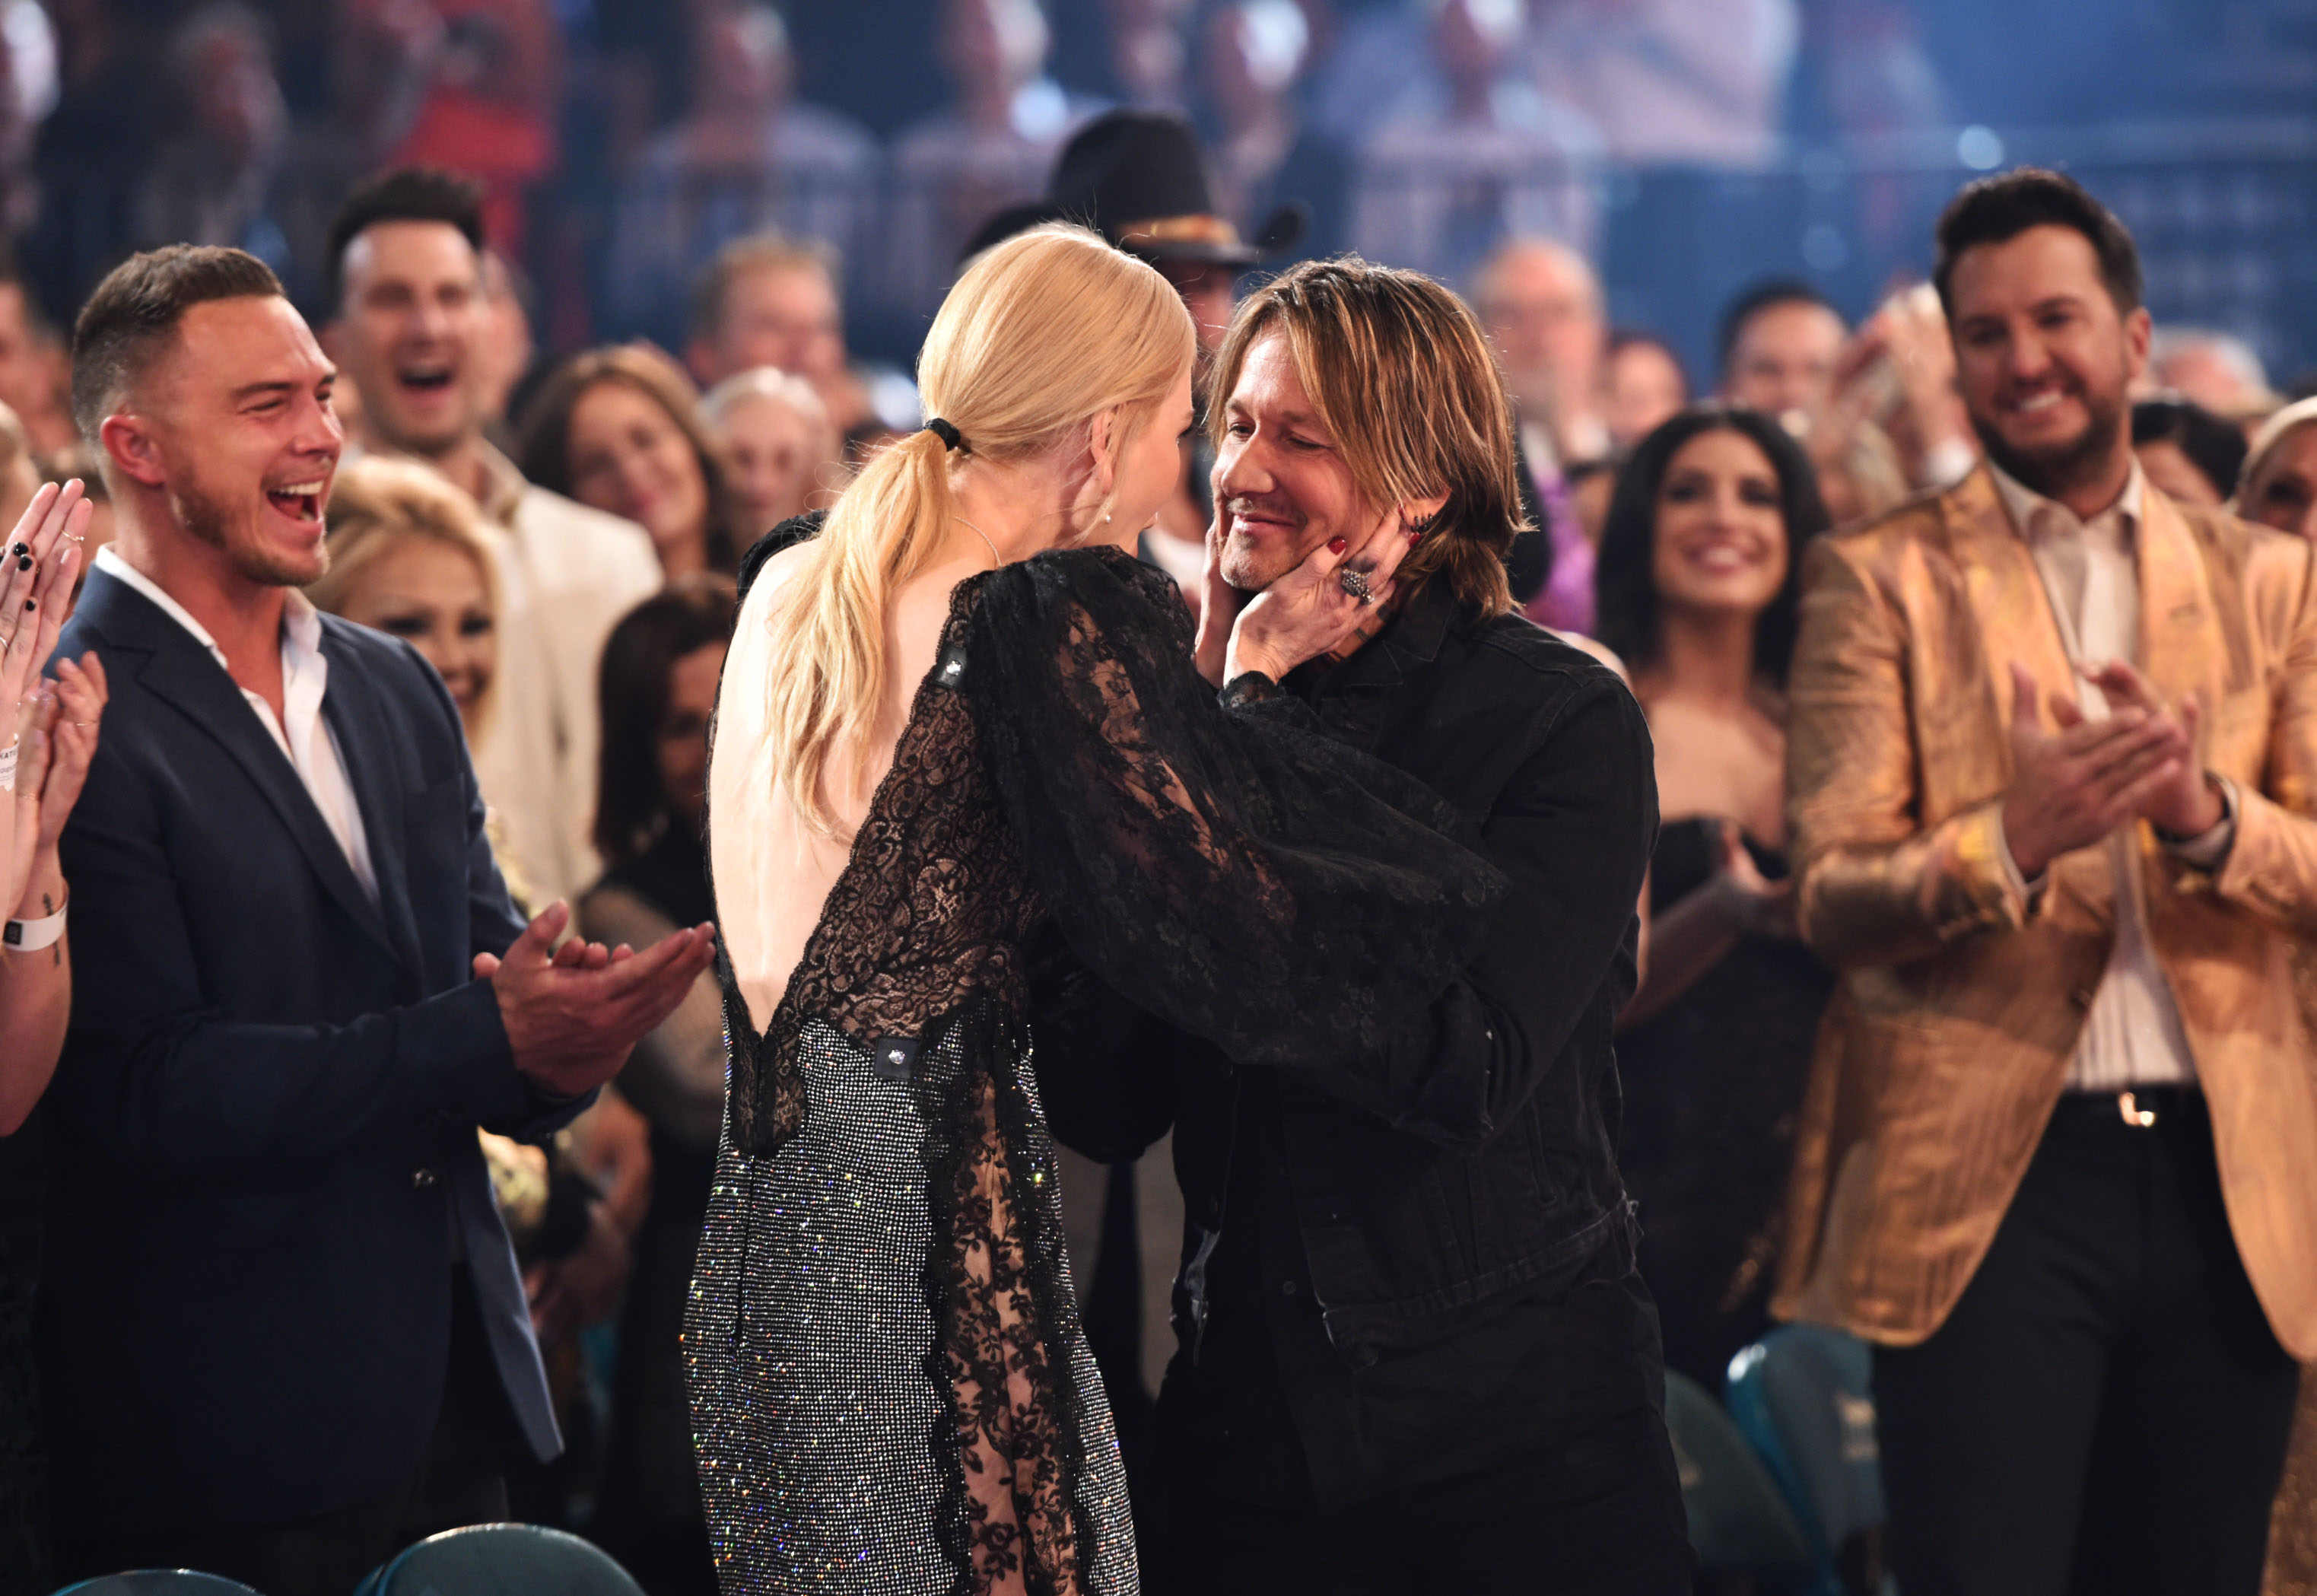 Nicole Kidman and Keith Urban during the 54th Academy Of Country Music Awards at MGM Grand Garden Arena on April 07, 2019 in Las Vegas, Nevada | Source: Getty Images